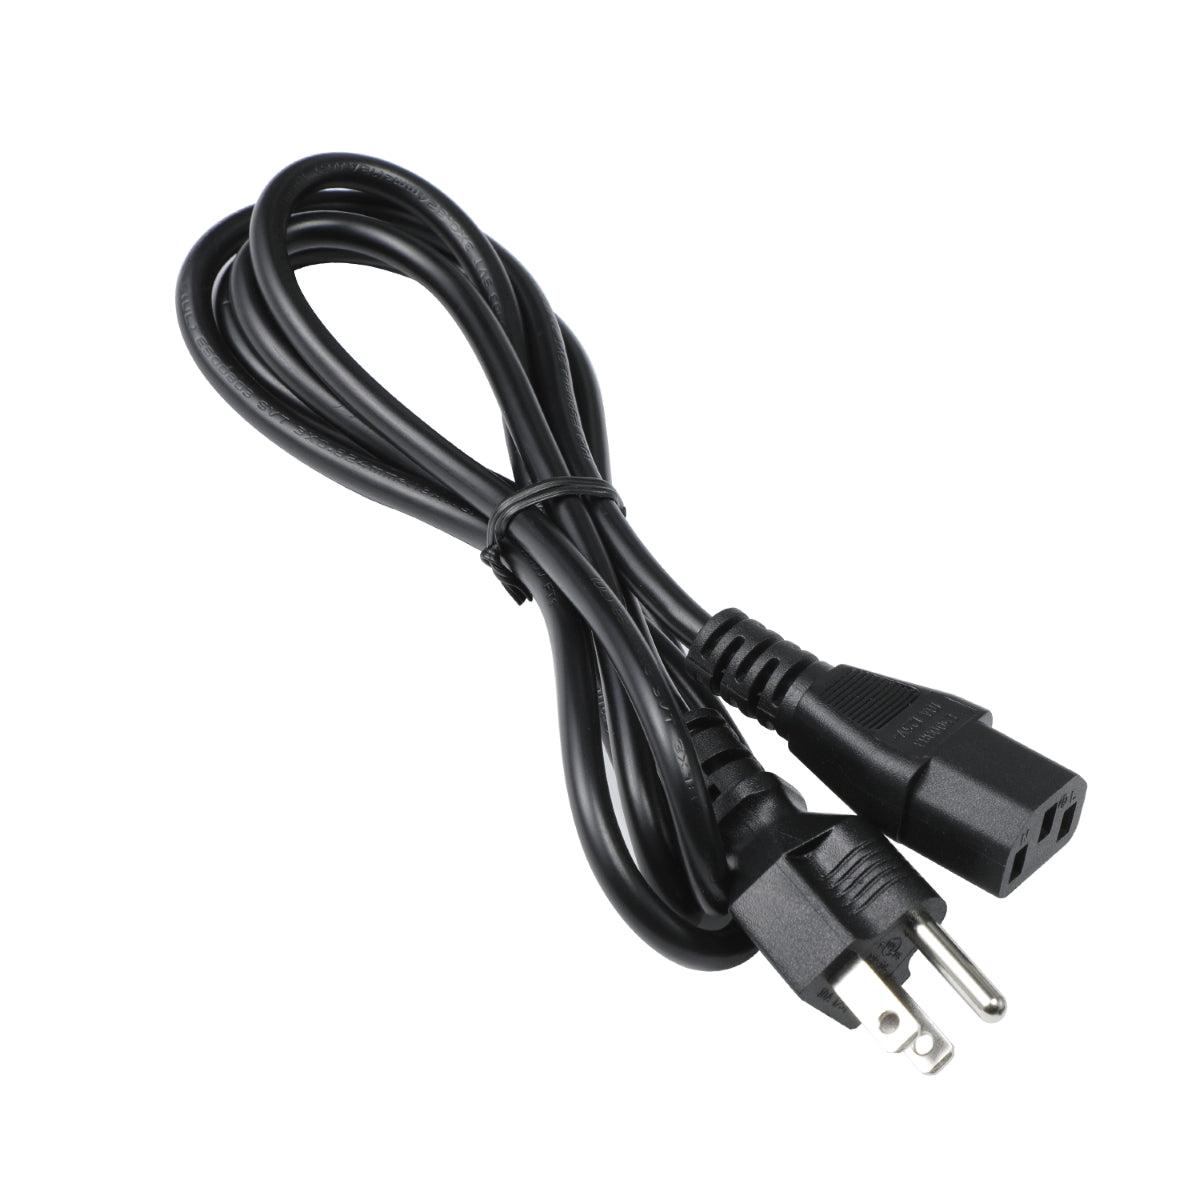 Power Cord for Acer VG272U Monitor.